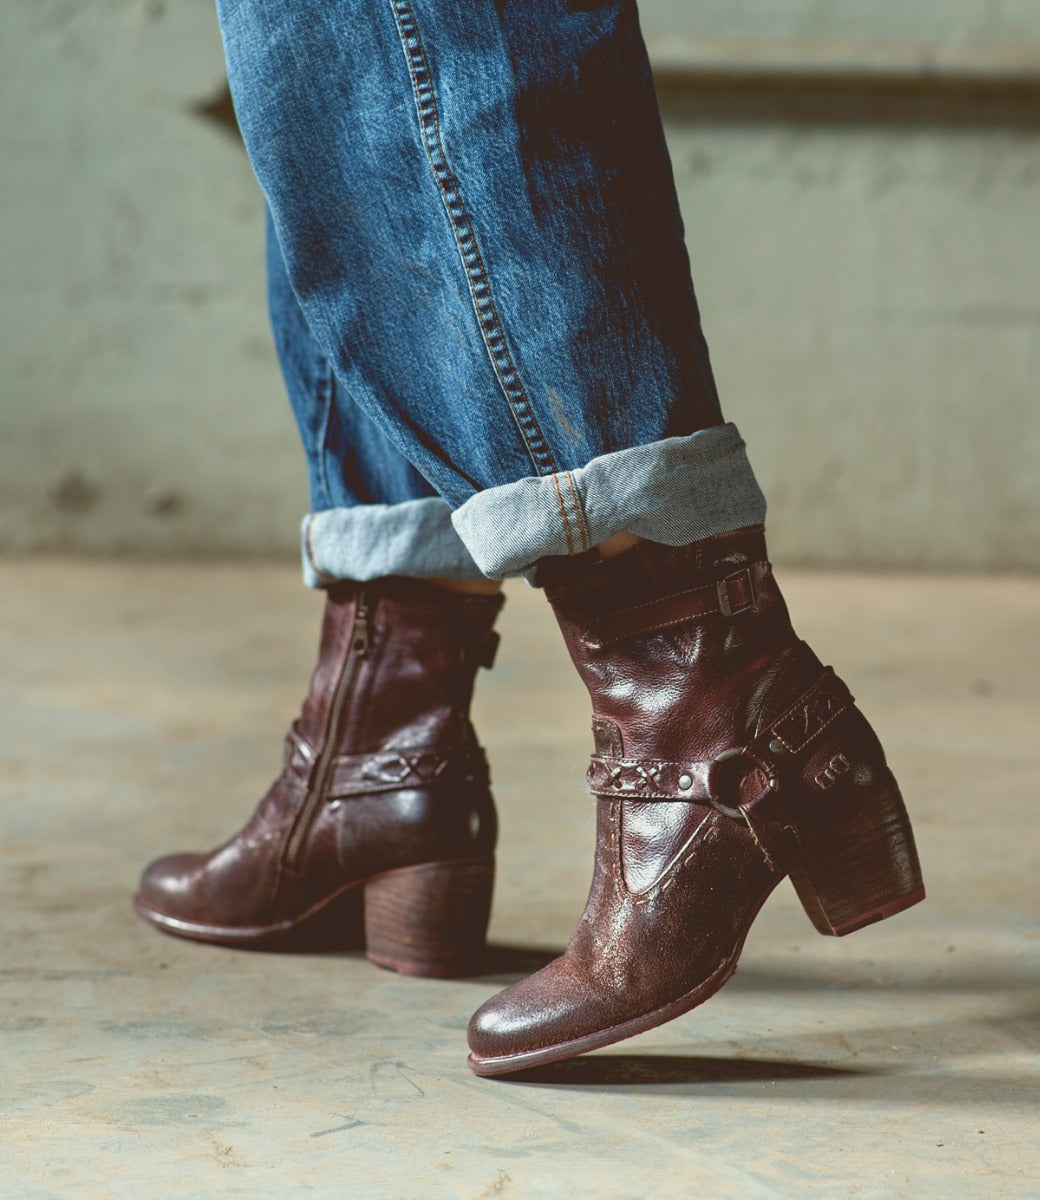 A pair of Bed Stu Octane II brown leather boots on a person's feet.